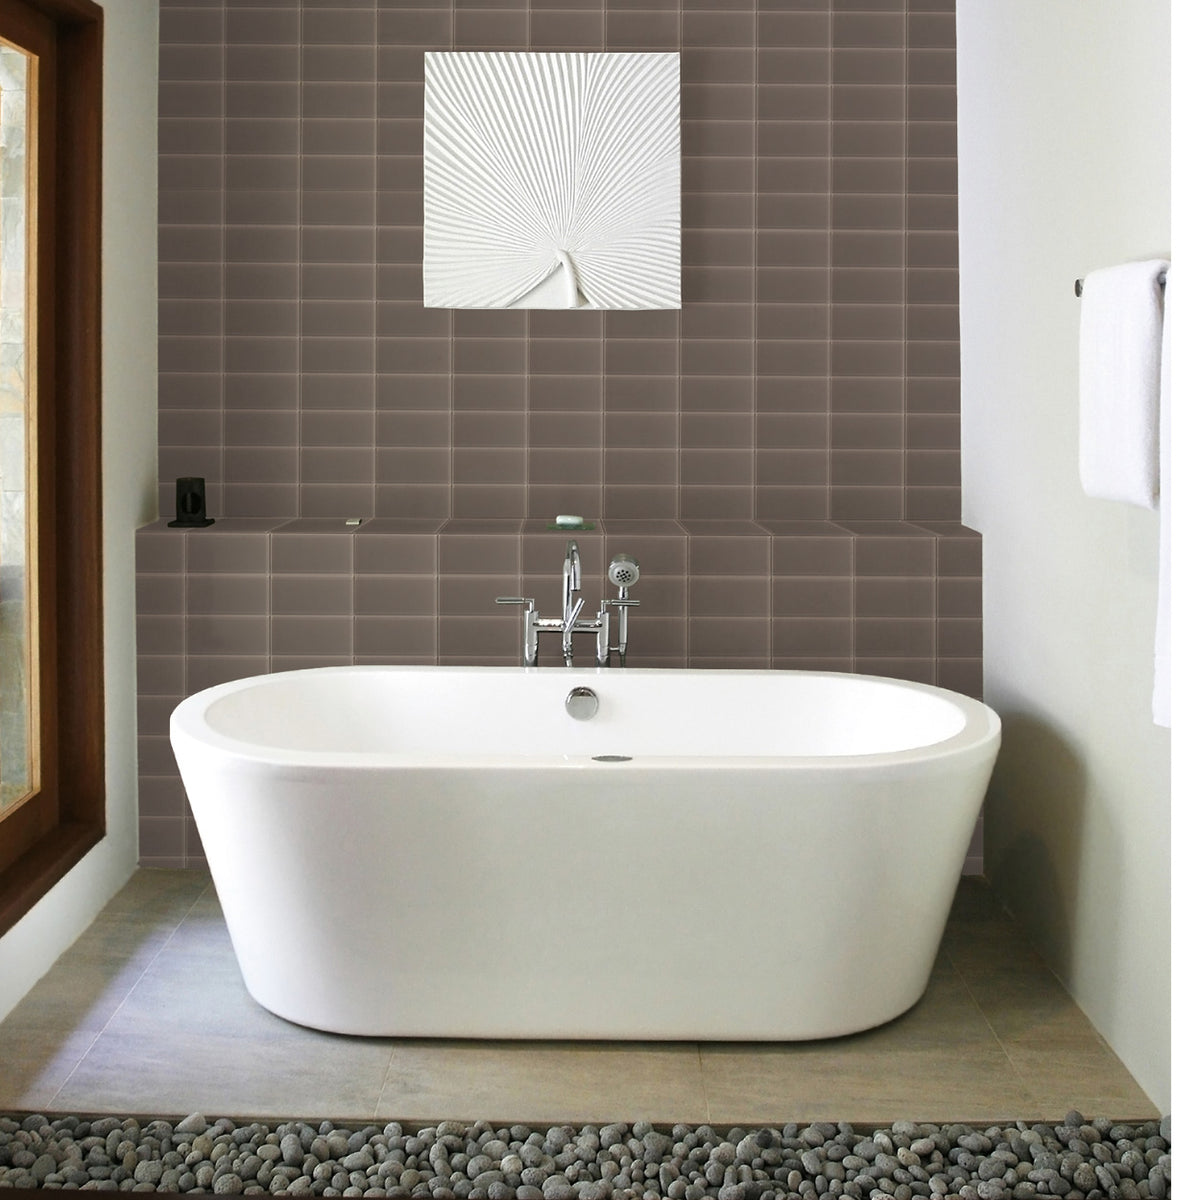 Lungarno - Urban Textures Contempo 3 in. x 6 in. Wall Tile - Gray Installed